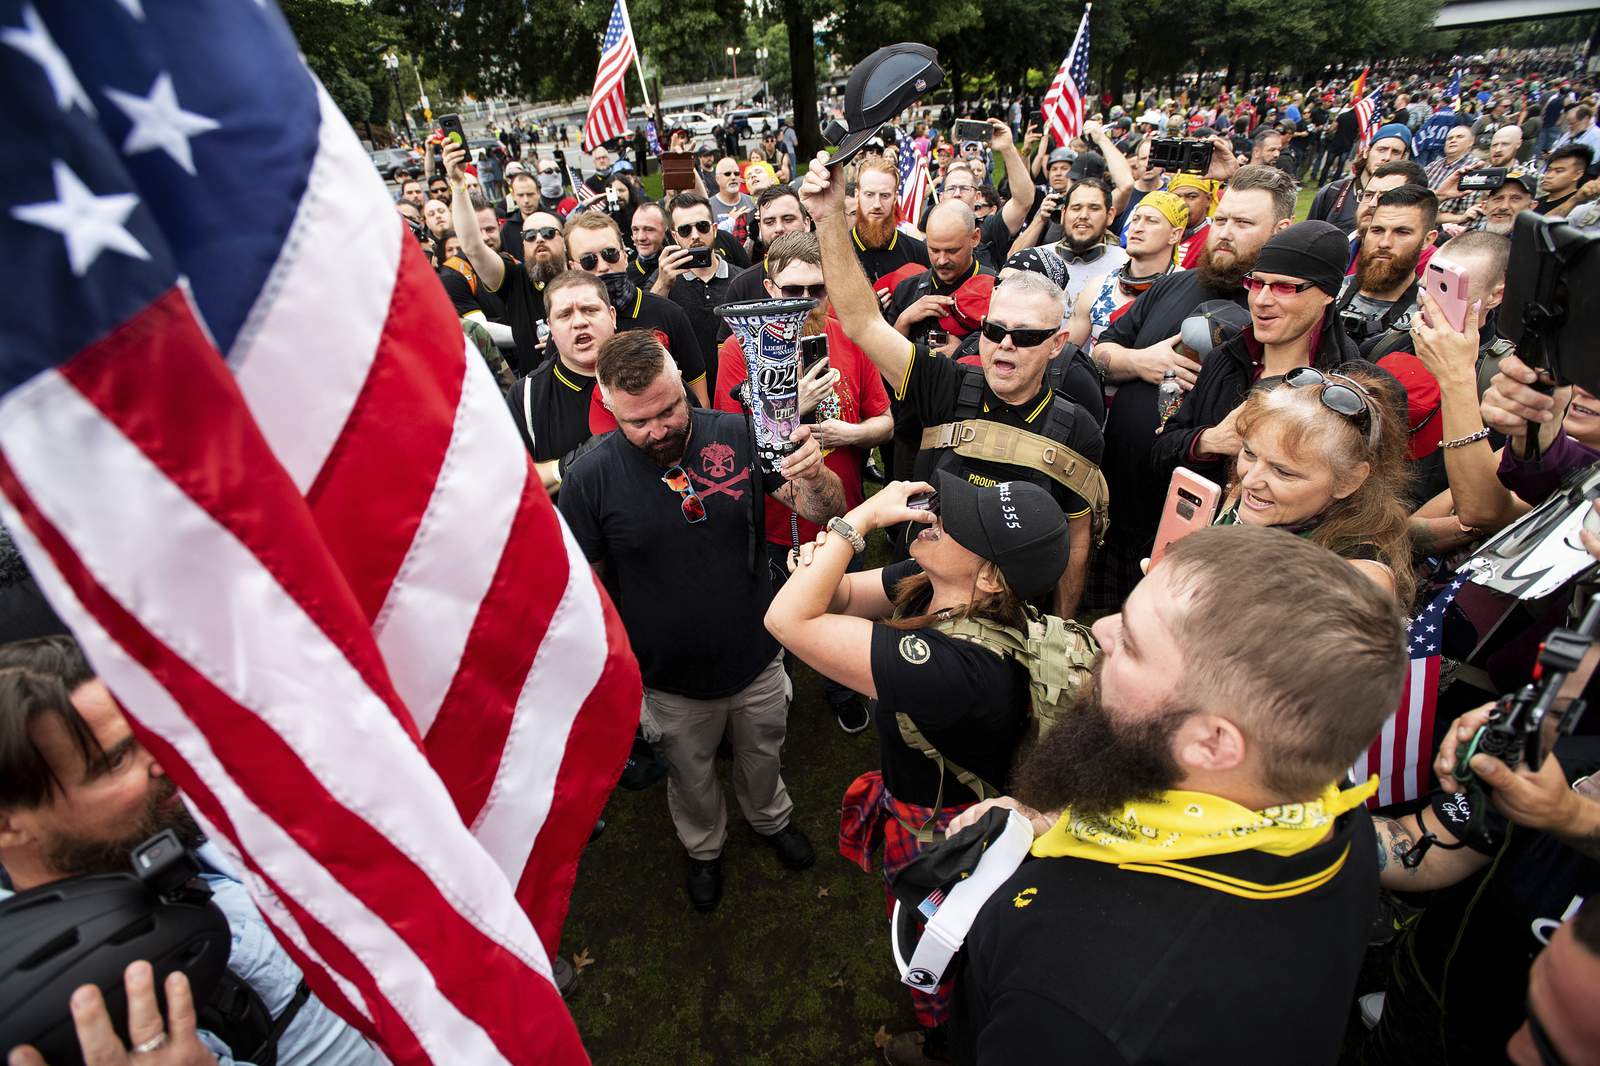 Portland, Oregon, braces itself for large right-wing rally